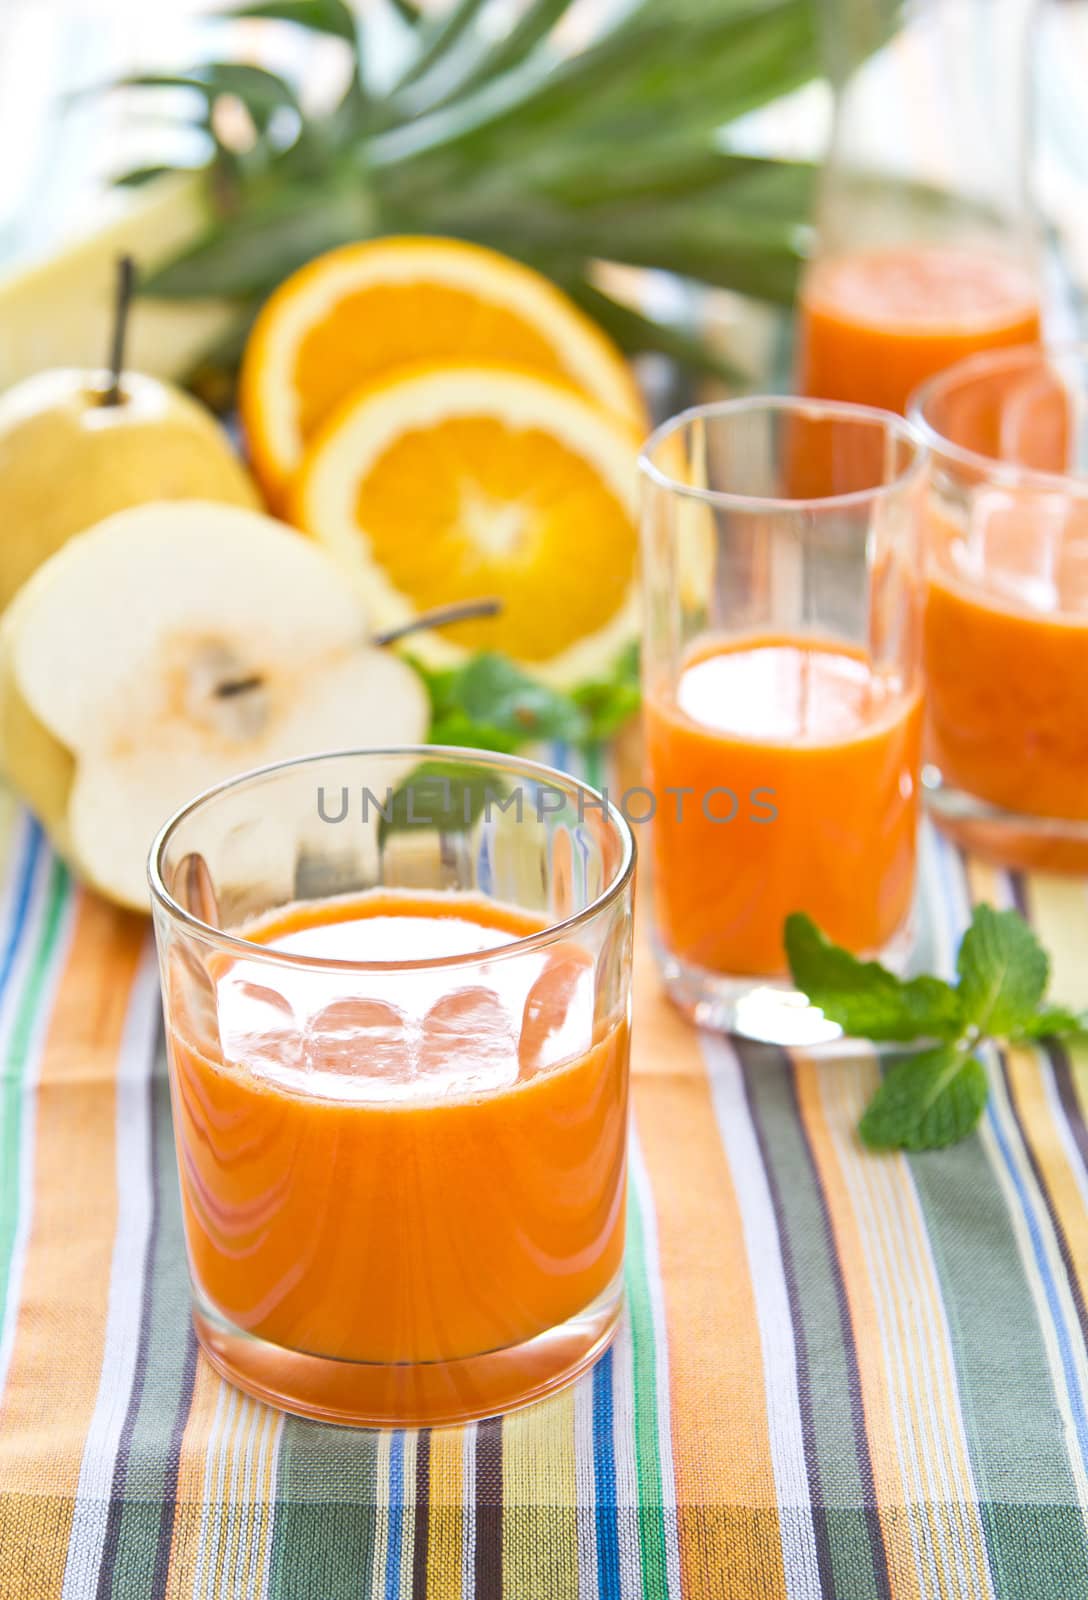 Pear,Orange  and carrot smoothie by vanillaechoes